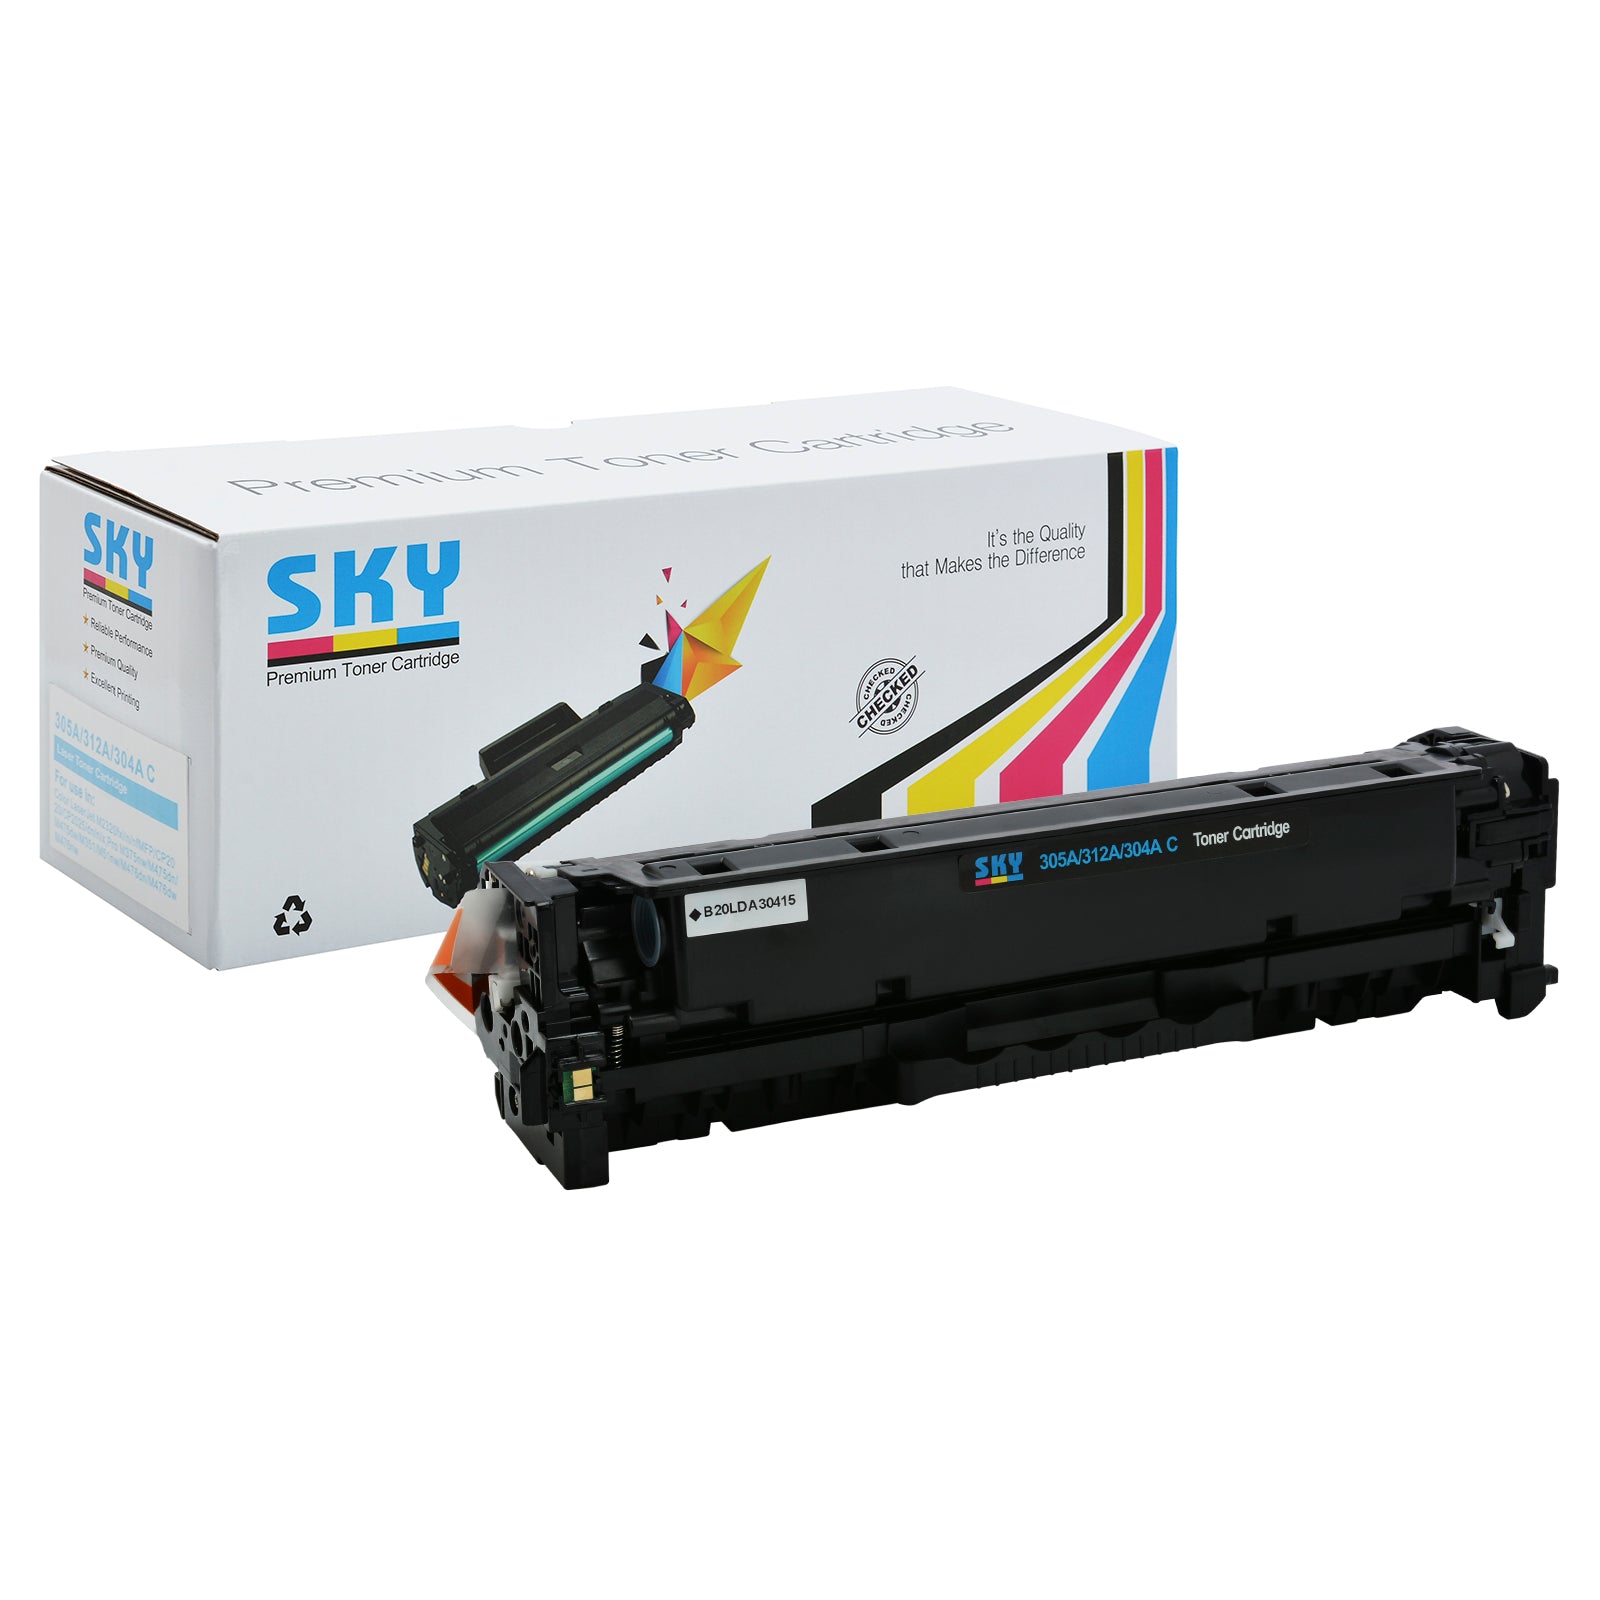 SKY 305A  Compatible Toner Cartridge for HP LaserJet Pro 400   MFP M451 and Pro 300 MFP M375